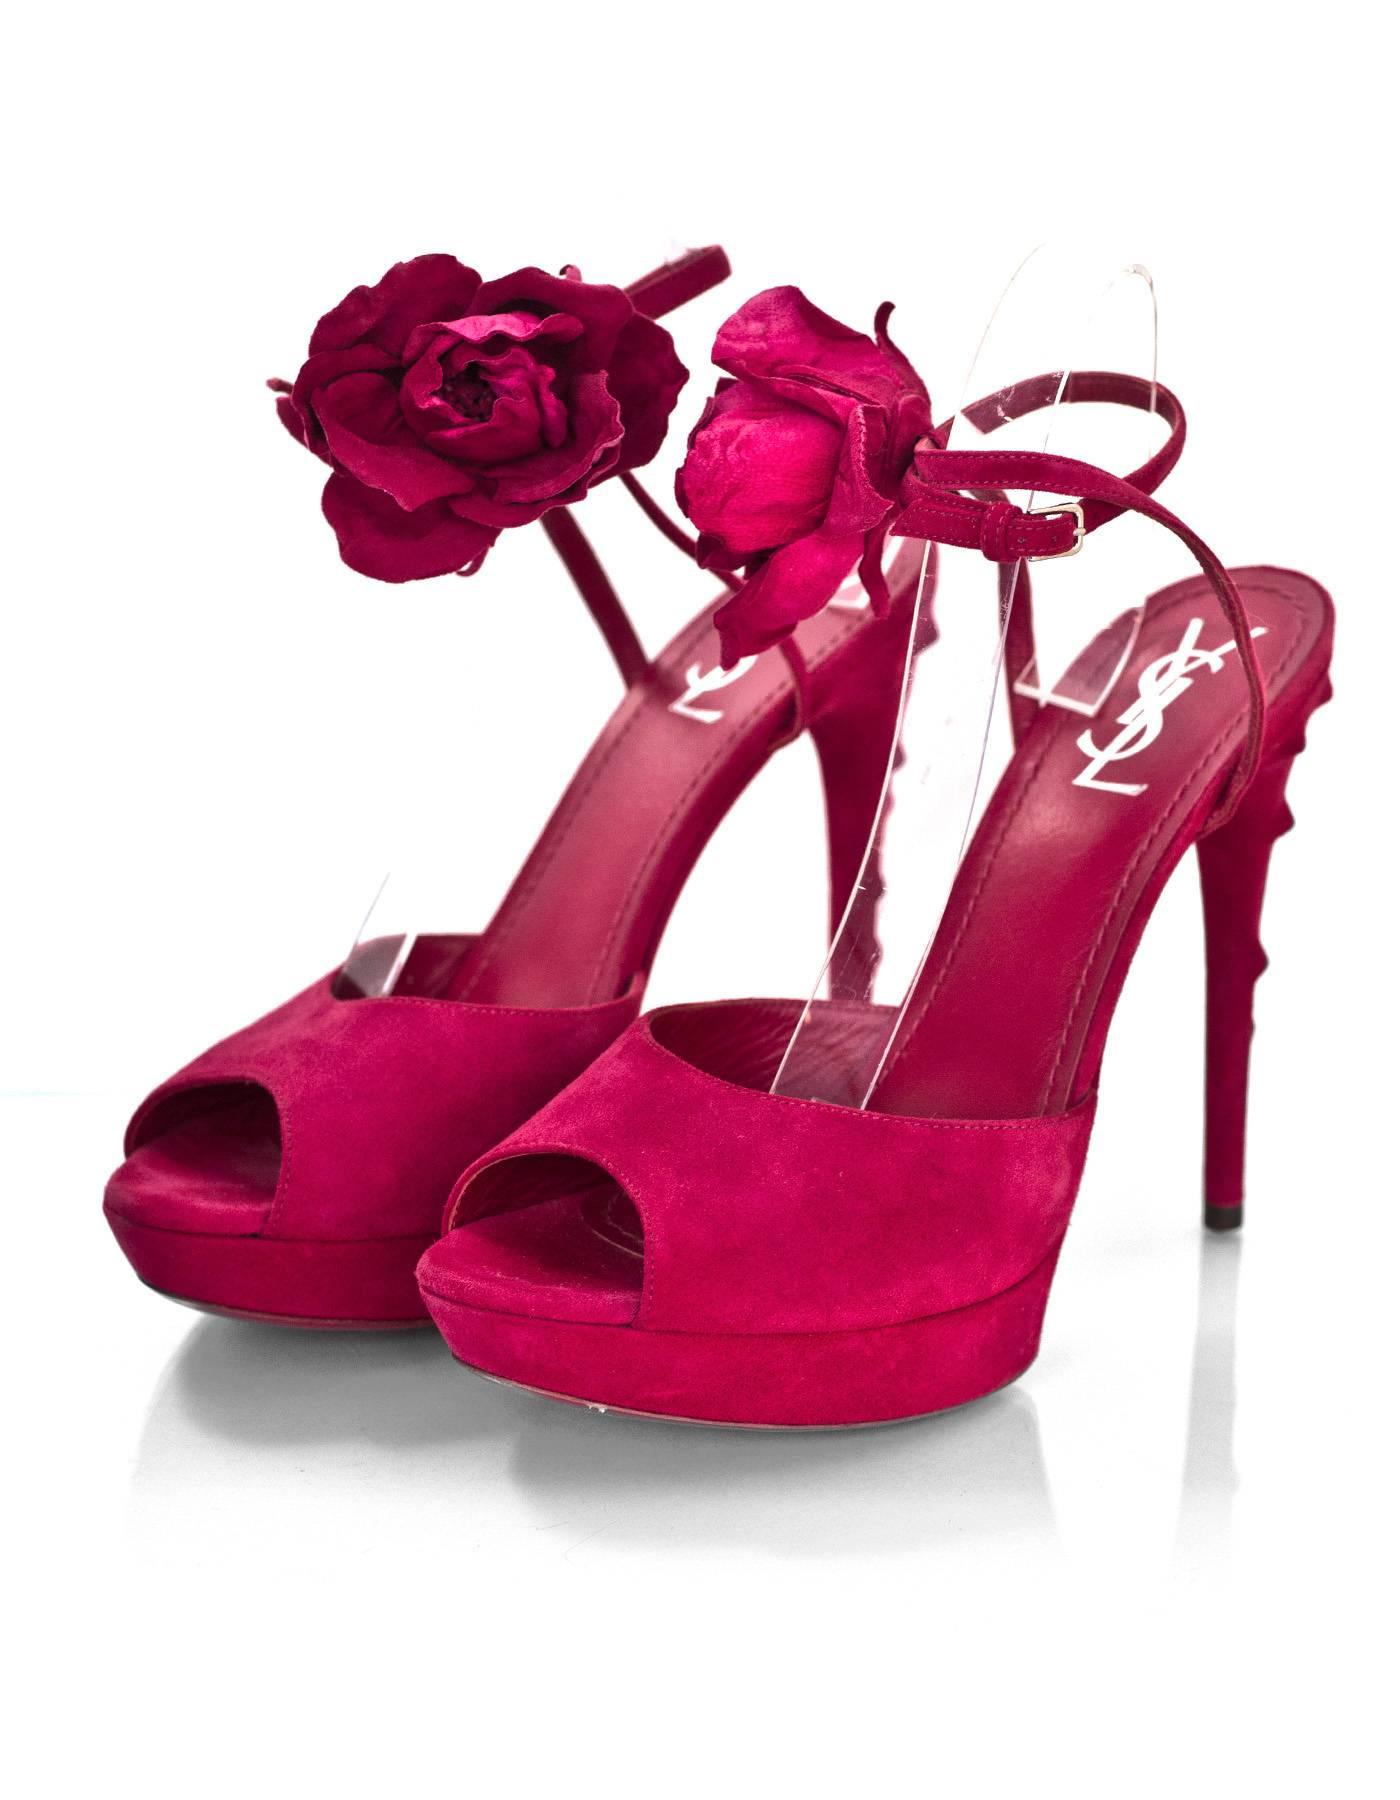 YSL Fuchsia Suede Open-Toe Sublime Sandals Sz 41

Features flower detail at ankle strap and